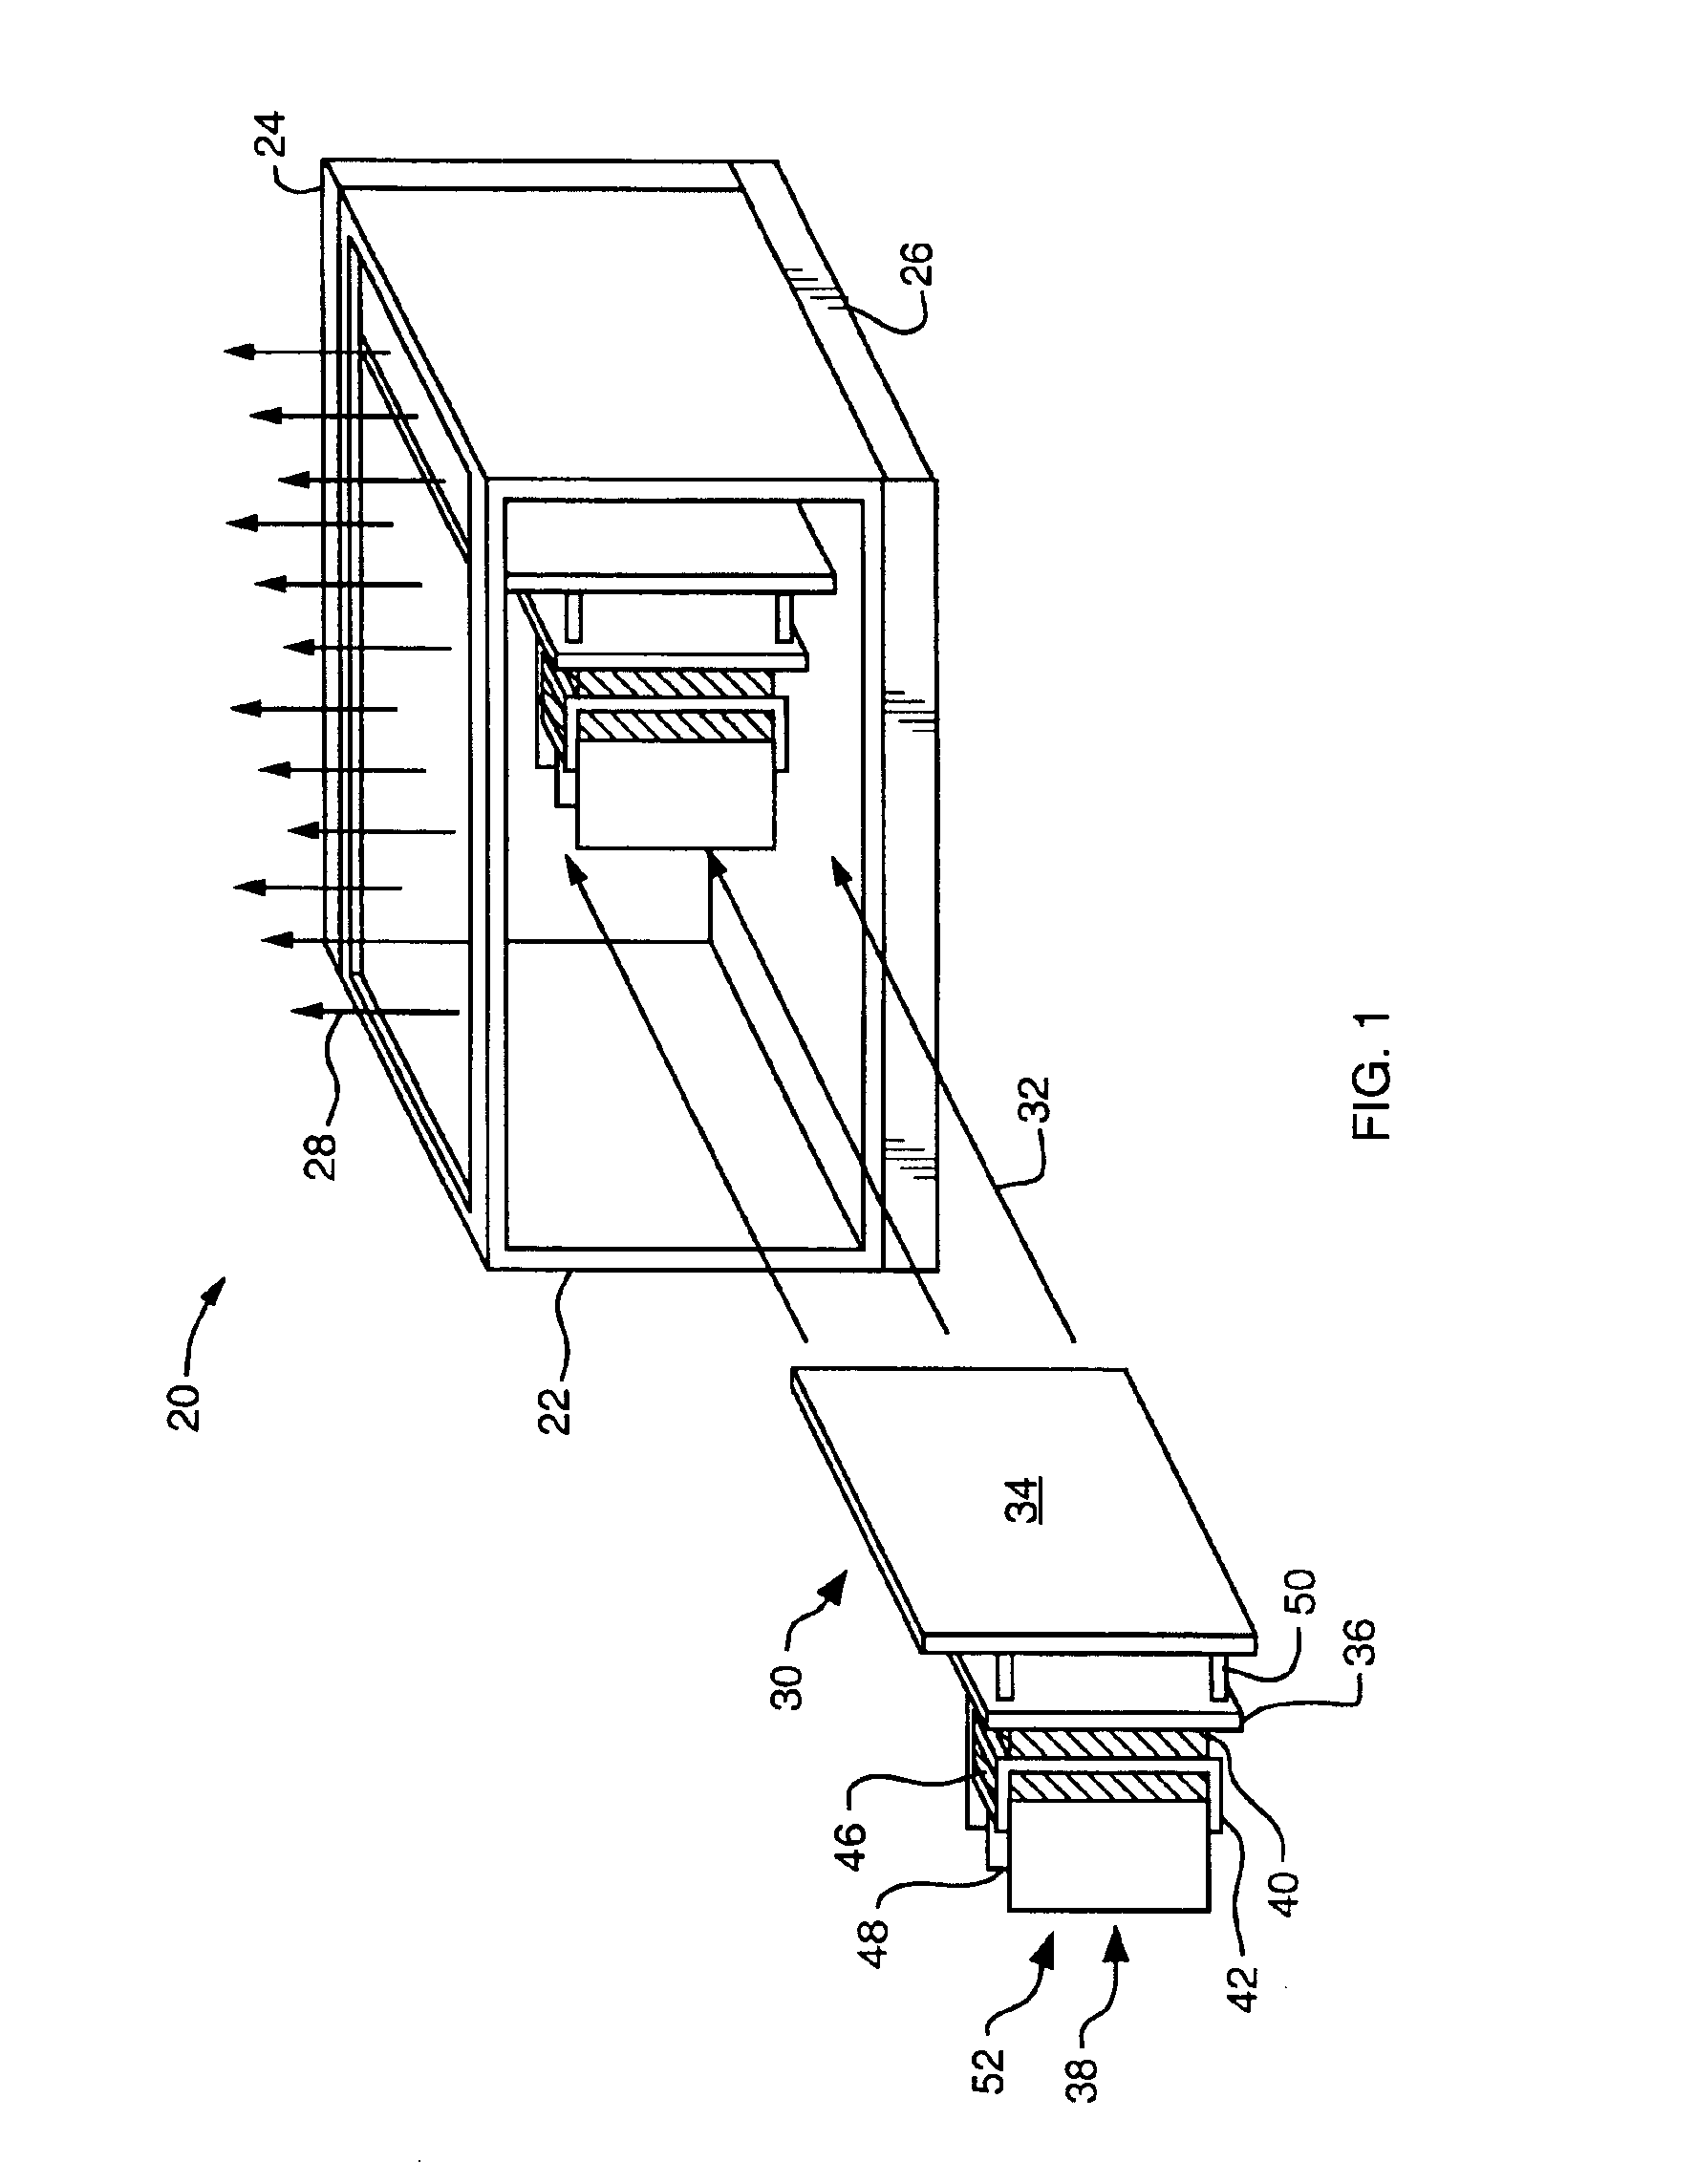 Methods and apparatus for attaching a heat sink to a circuit board component